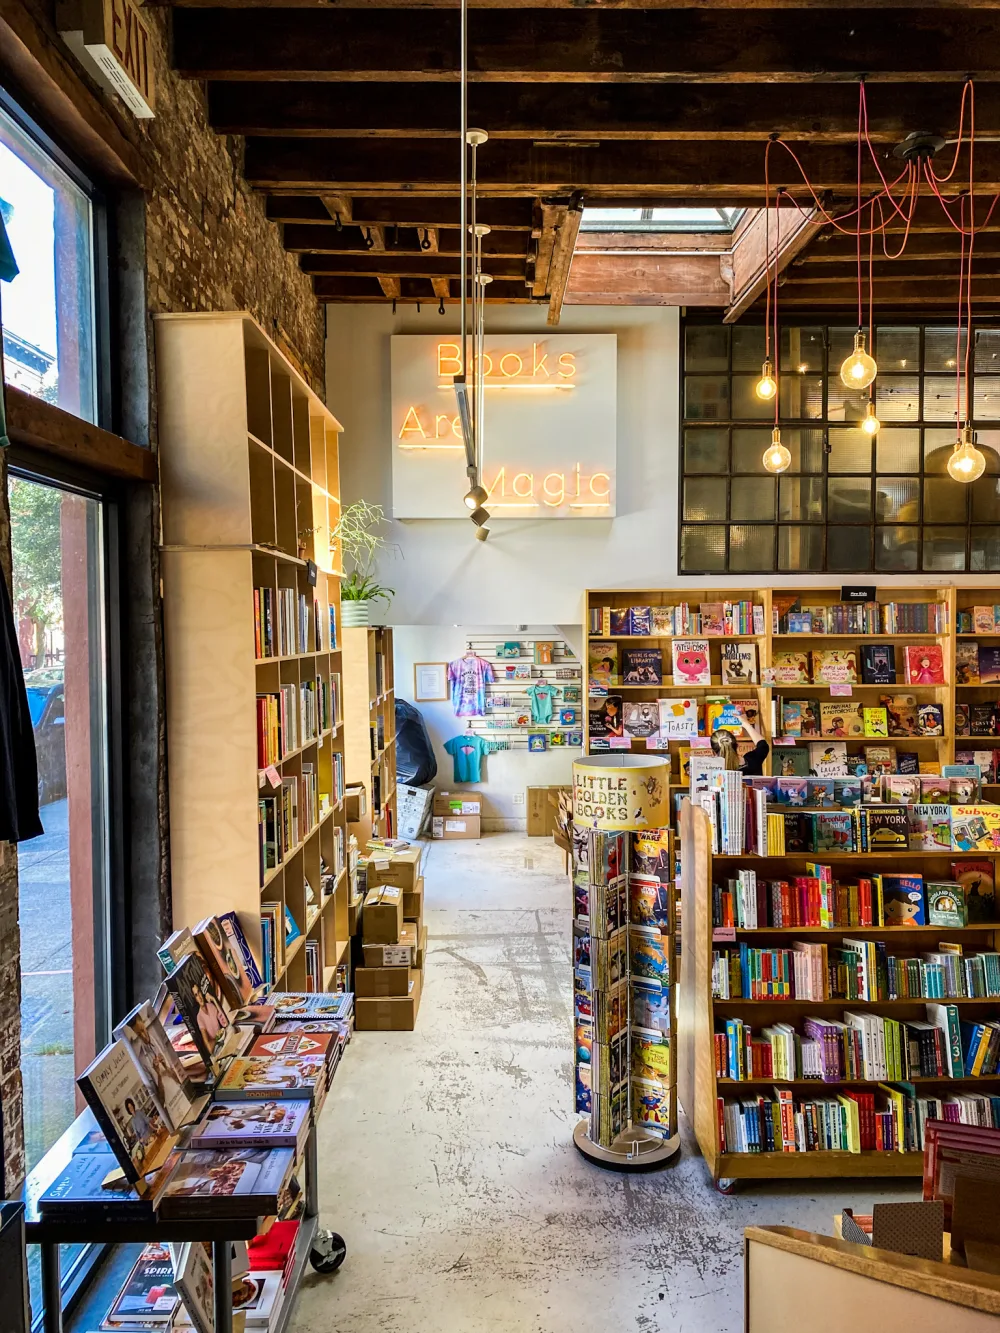 Books Are Magic is expanding its footprint in Brooklyn